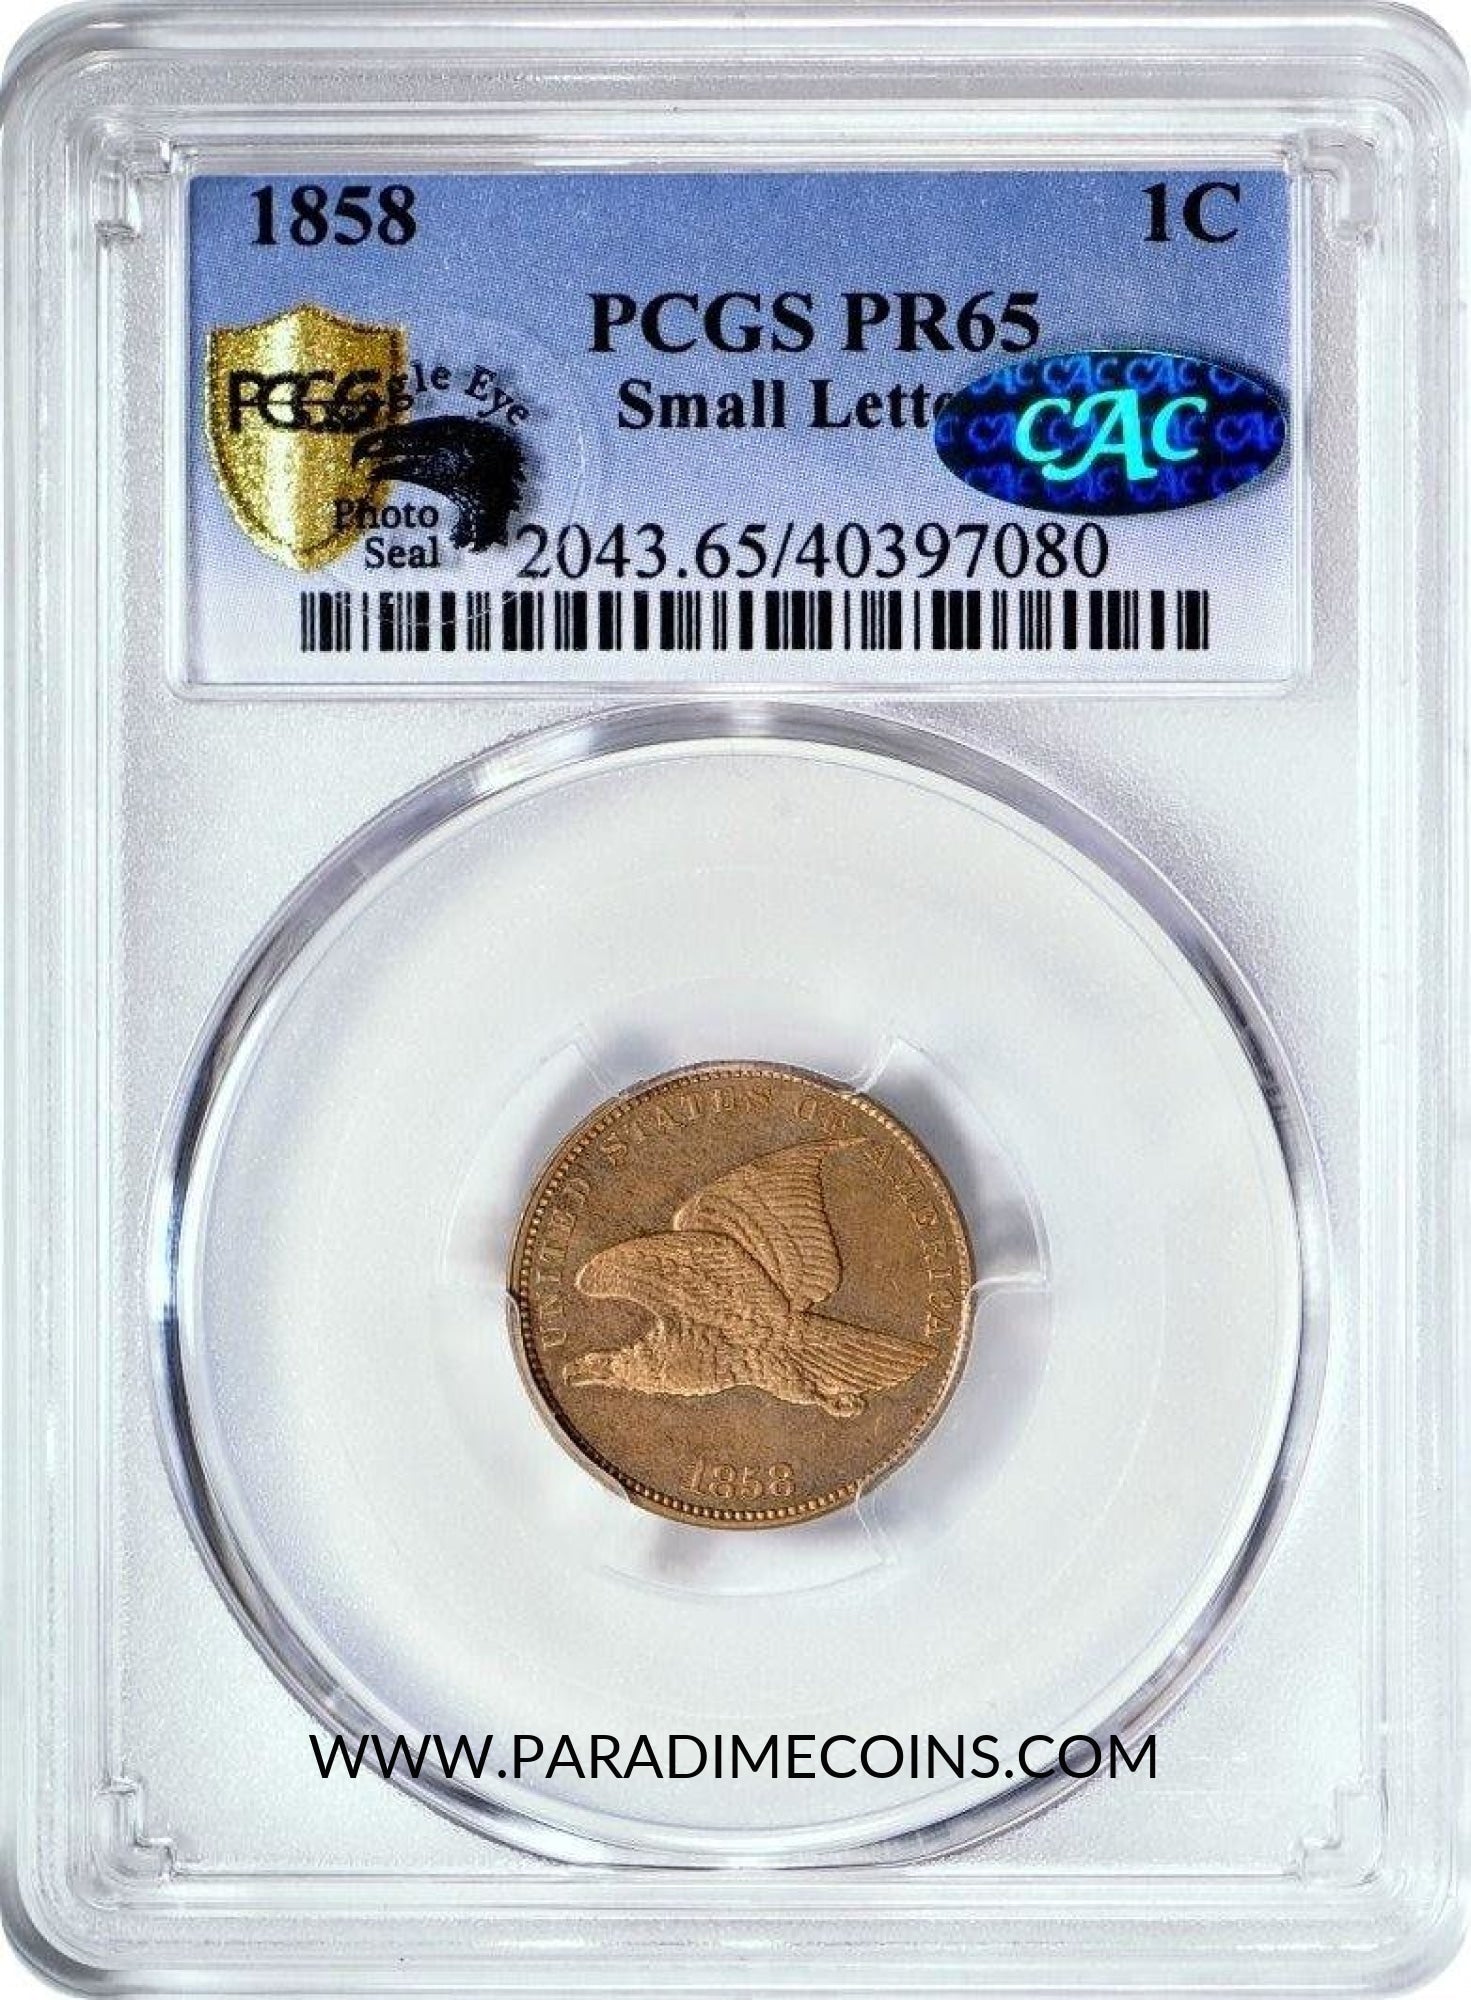 1858 1C PR65 Small Letters PCGS CAC PHOTO SEAL - Paradime Coins | PCGS NGC CACG CAC Rare US Numismatic Coins For Sale